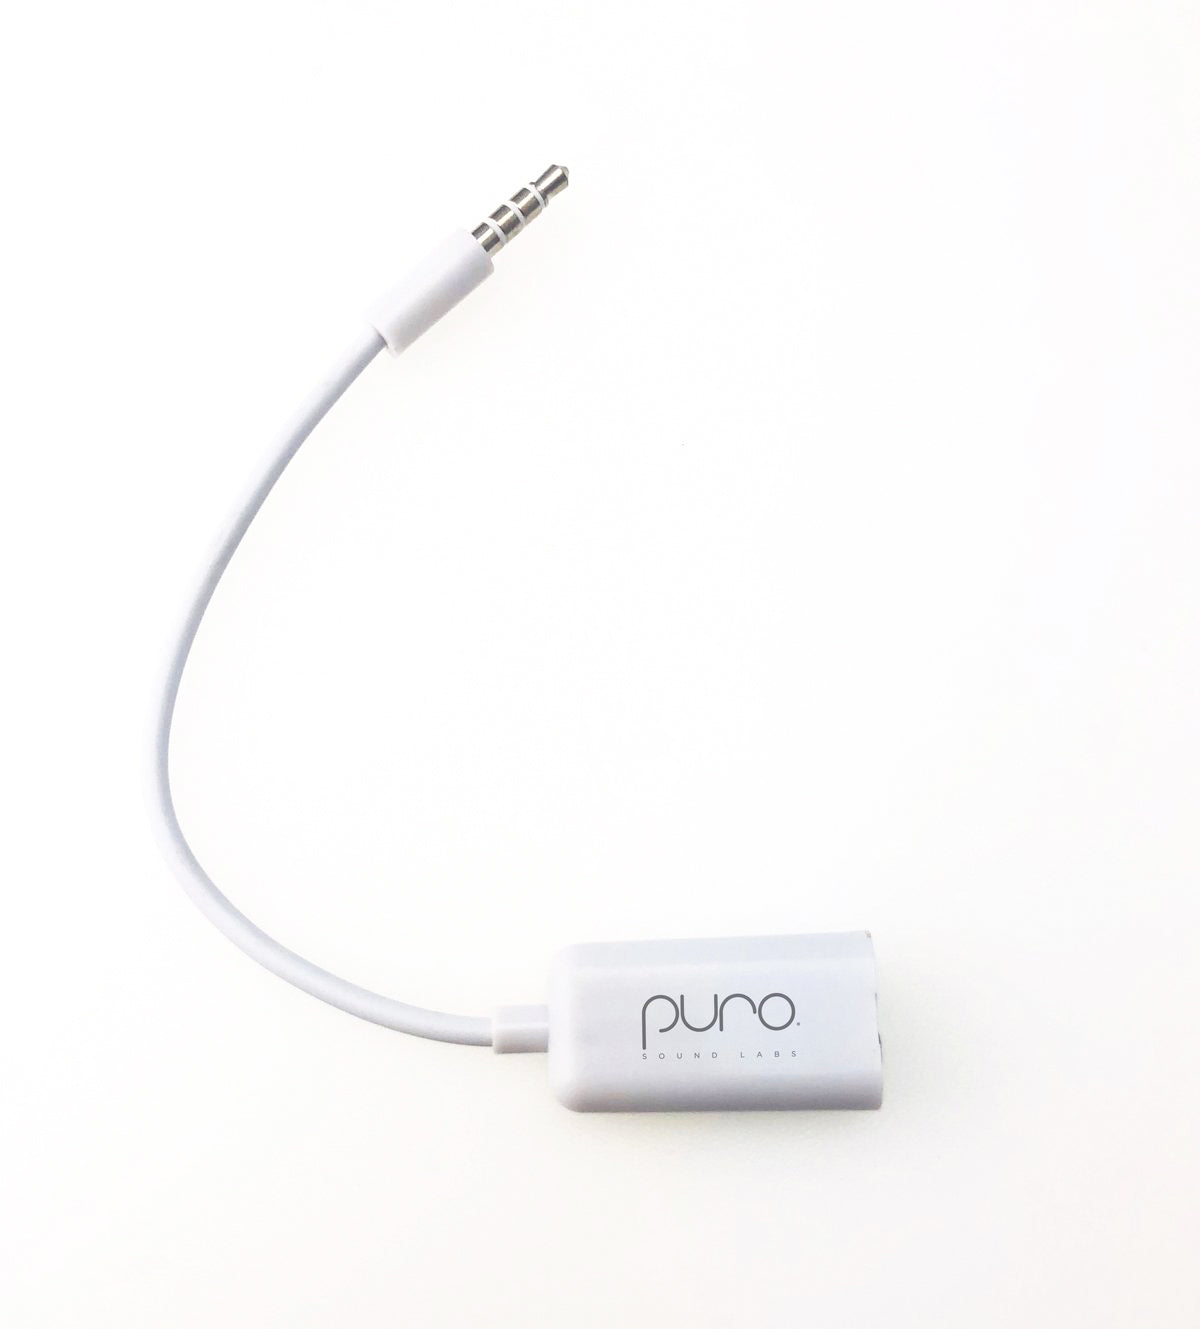 Puro Sound Labs Splitter Cable to connect 2 3.5mm cables to 1 device